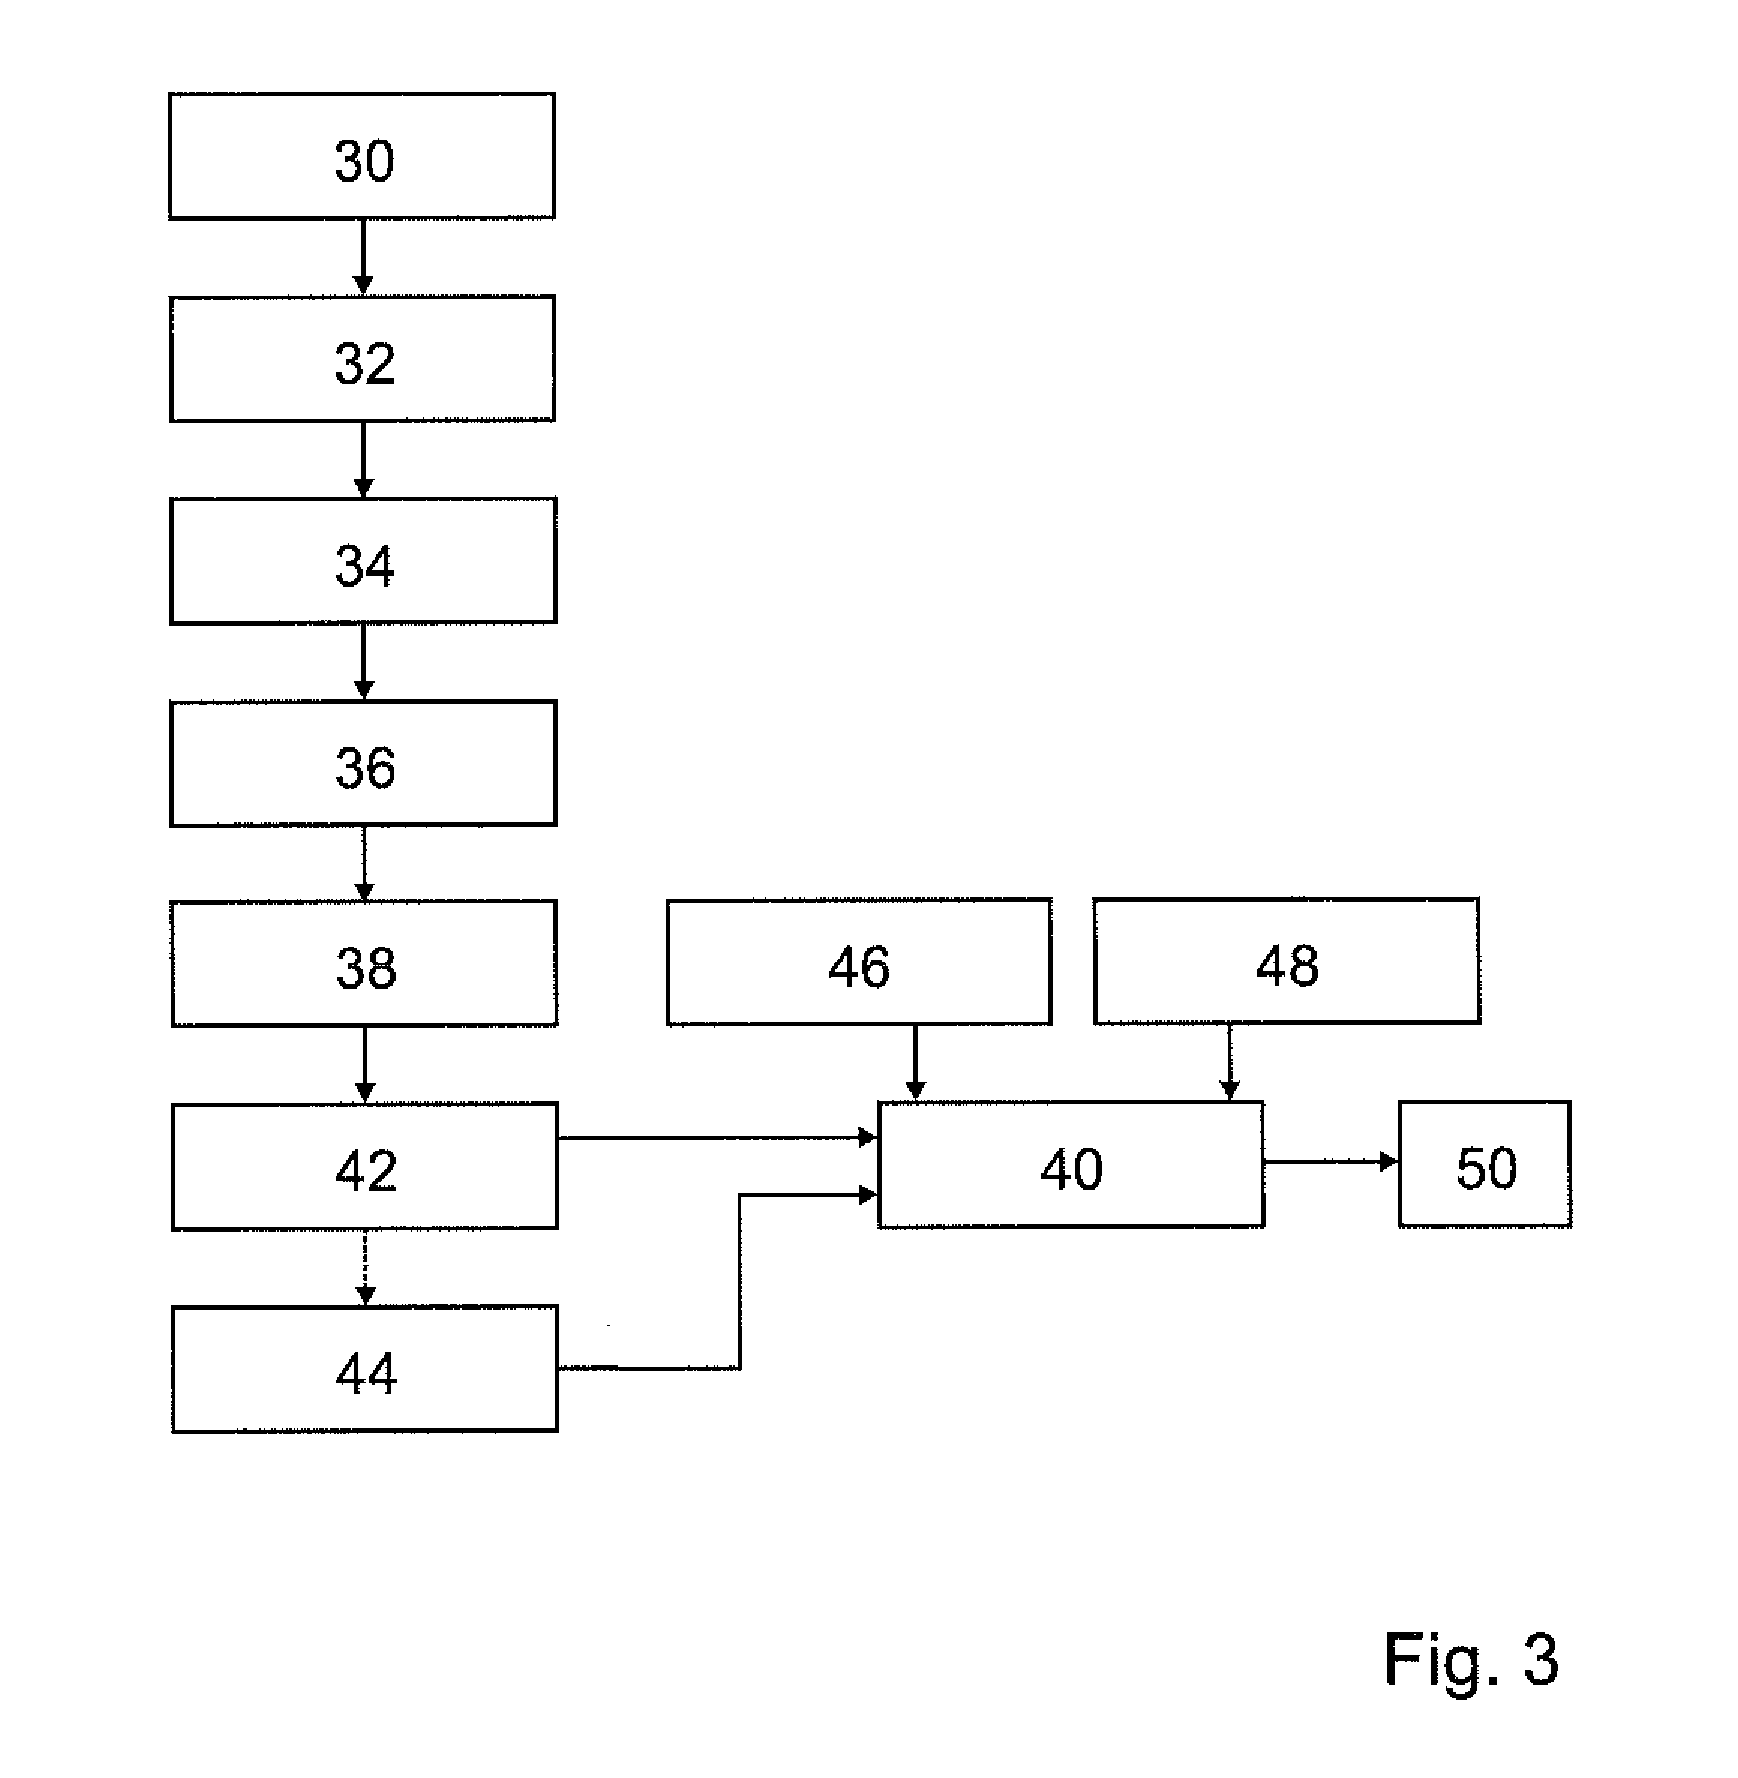 System and method for recognizing a user voice command in noisy environment